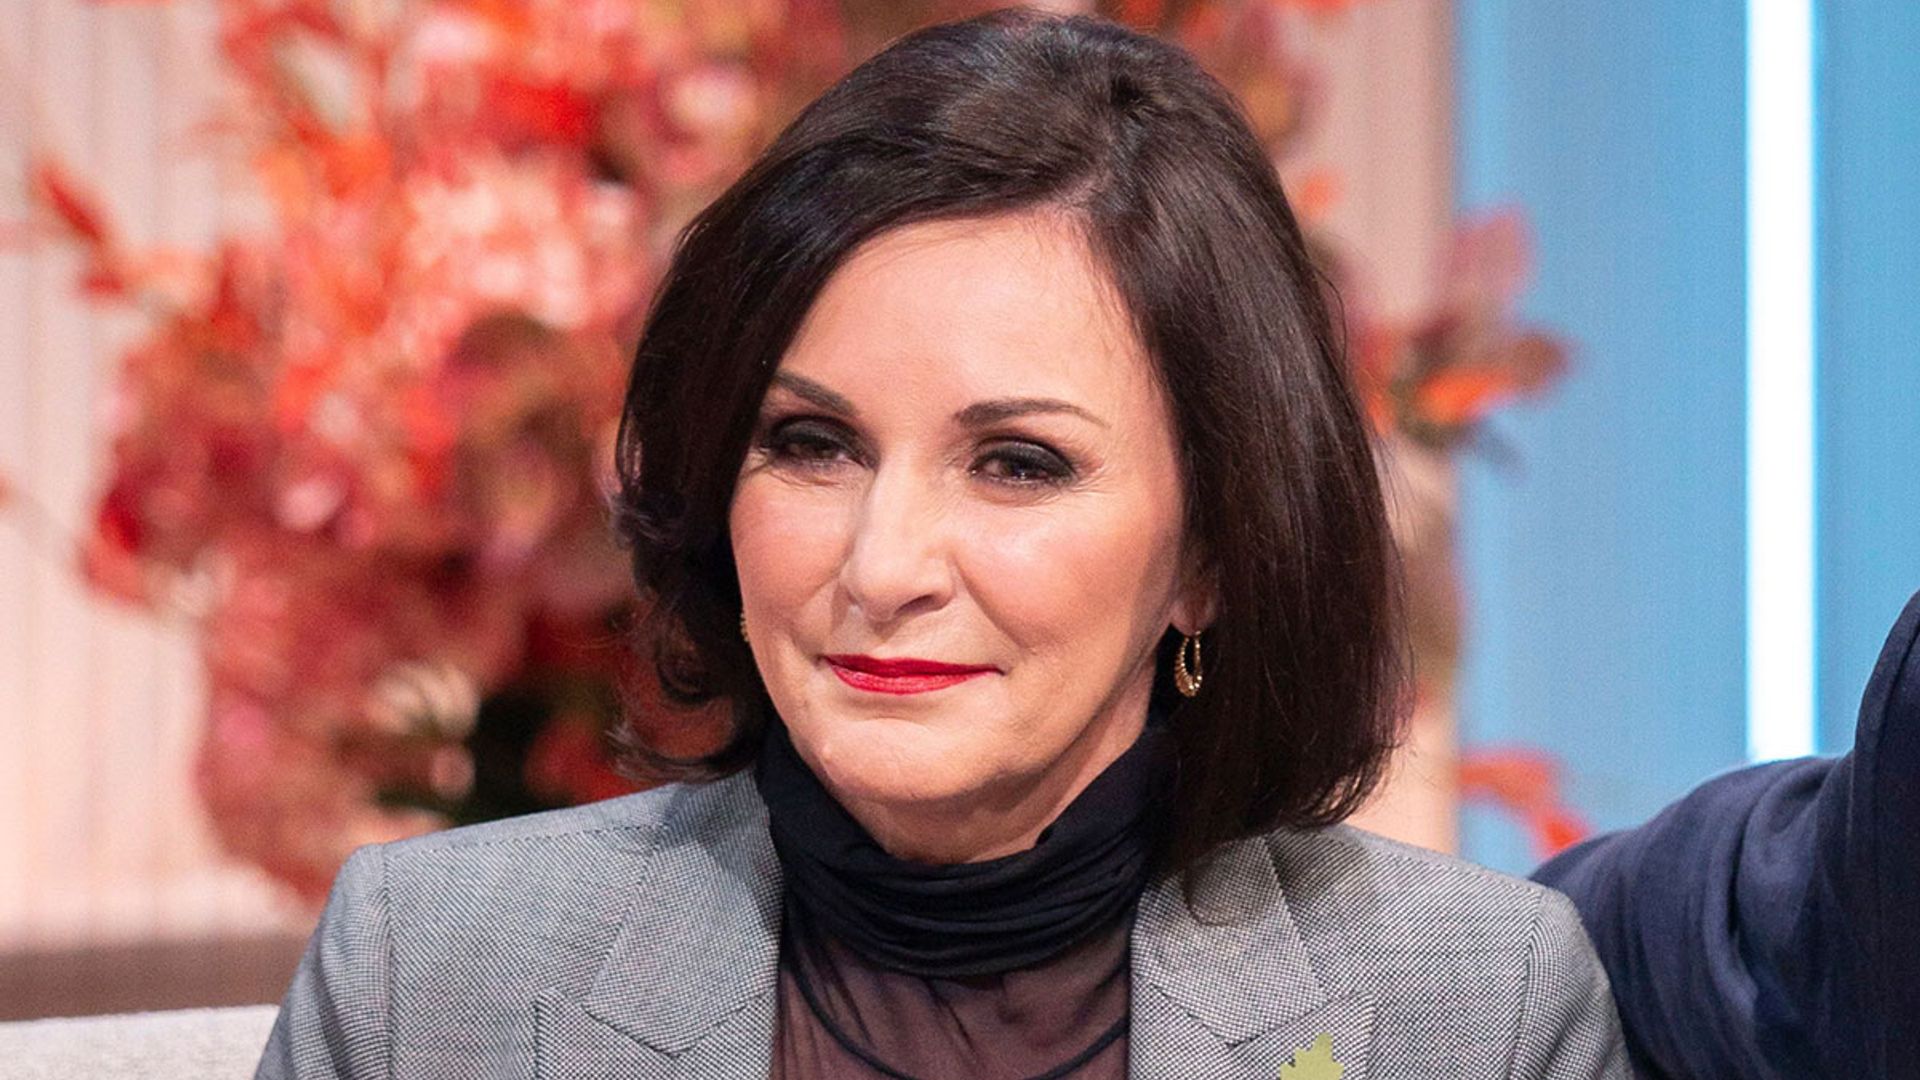 Strictly's Shirley Ballas reveals test results amid 'lump' scare: 'The doctor was alarmed'